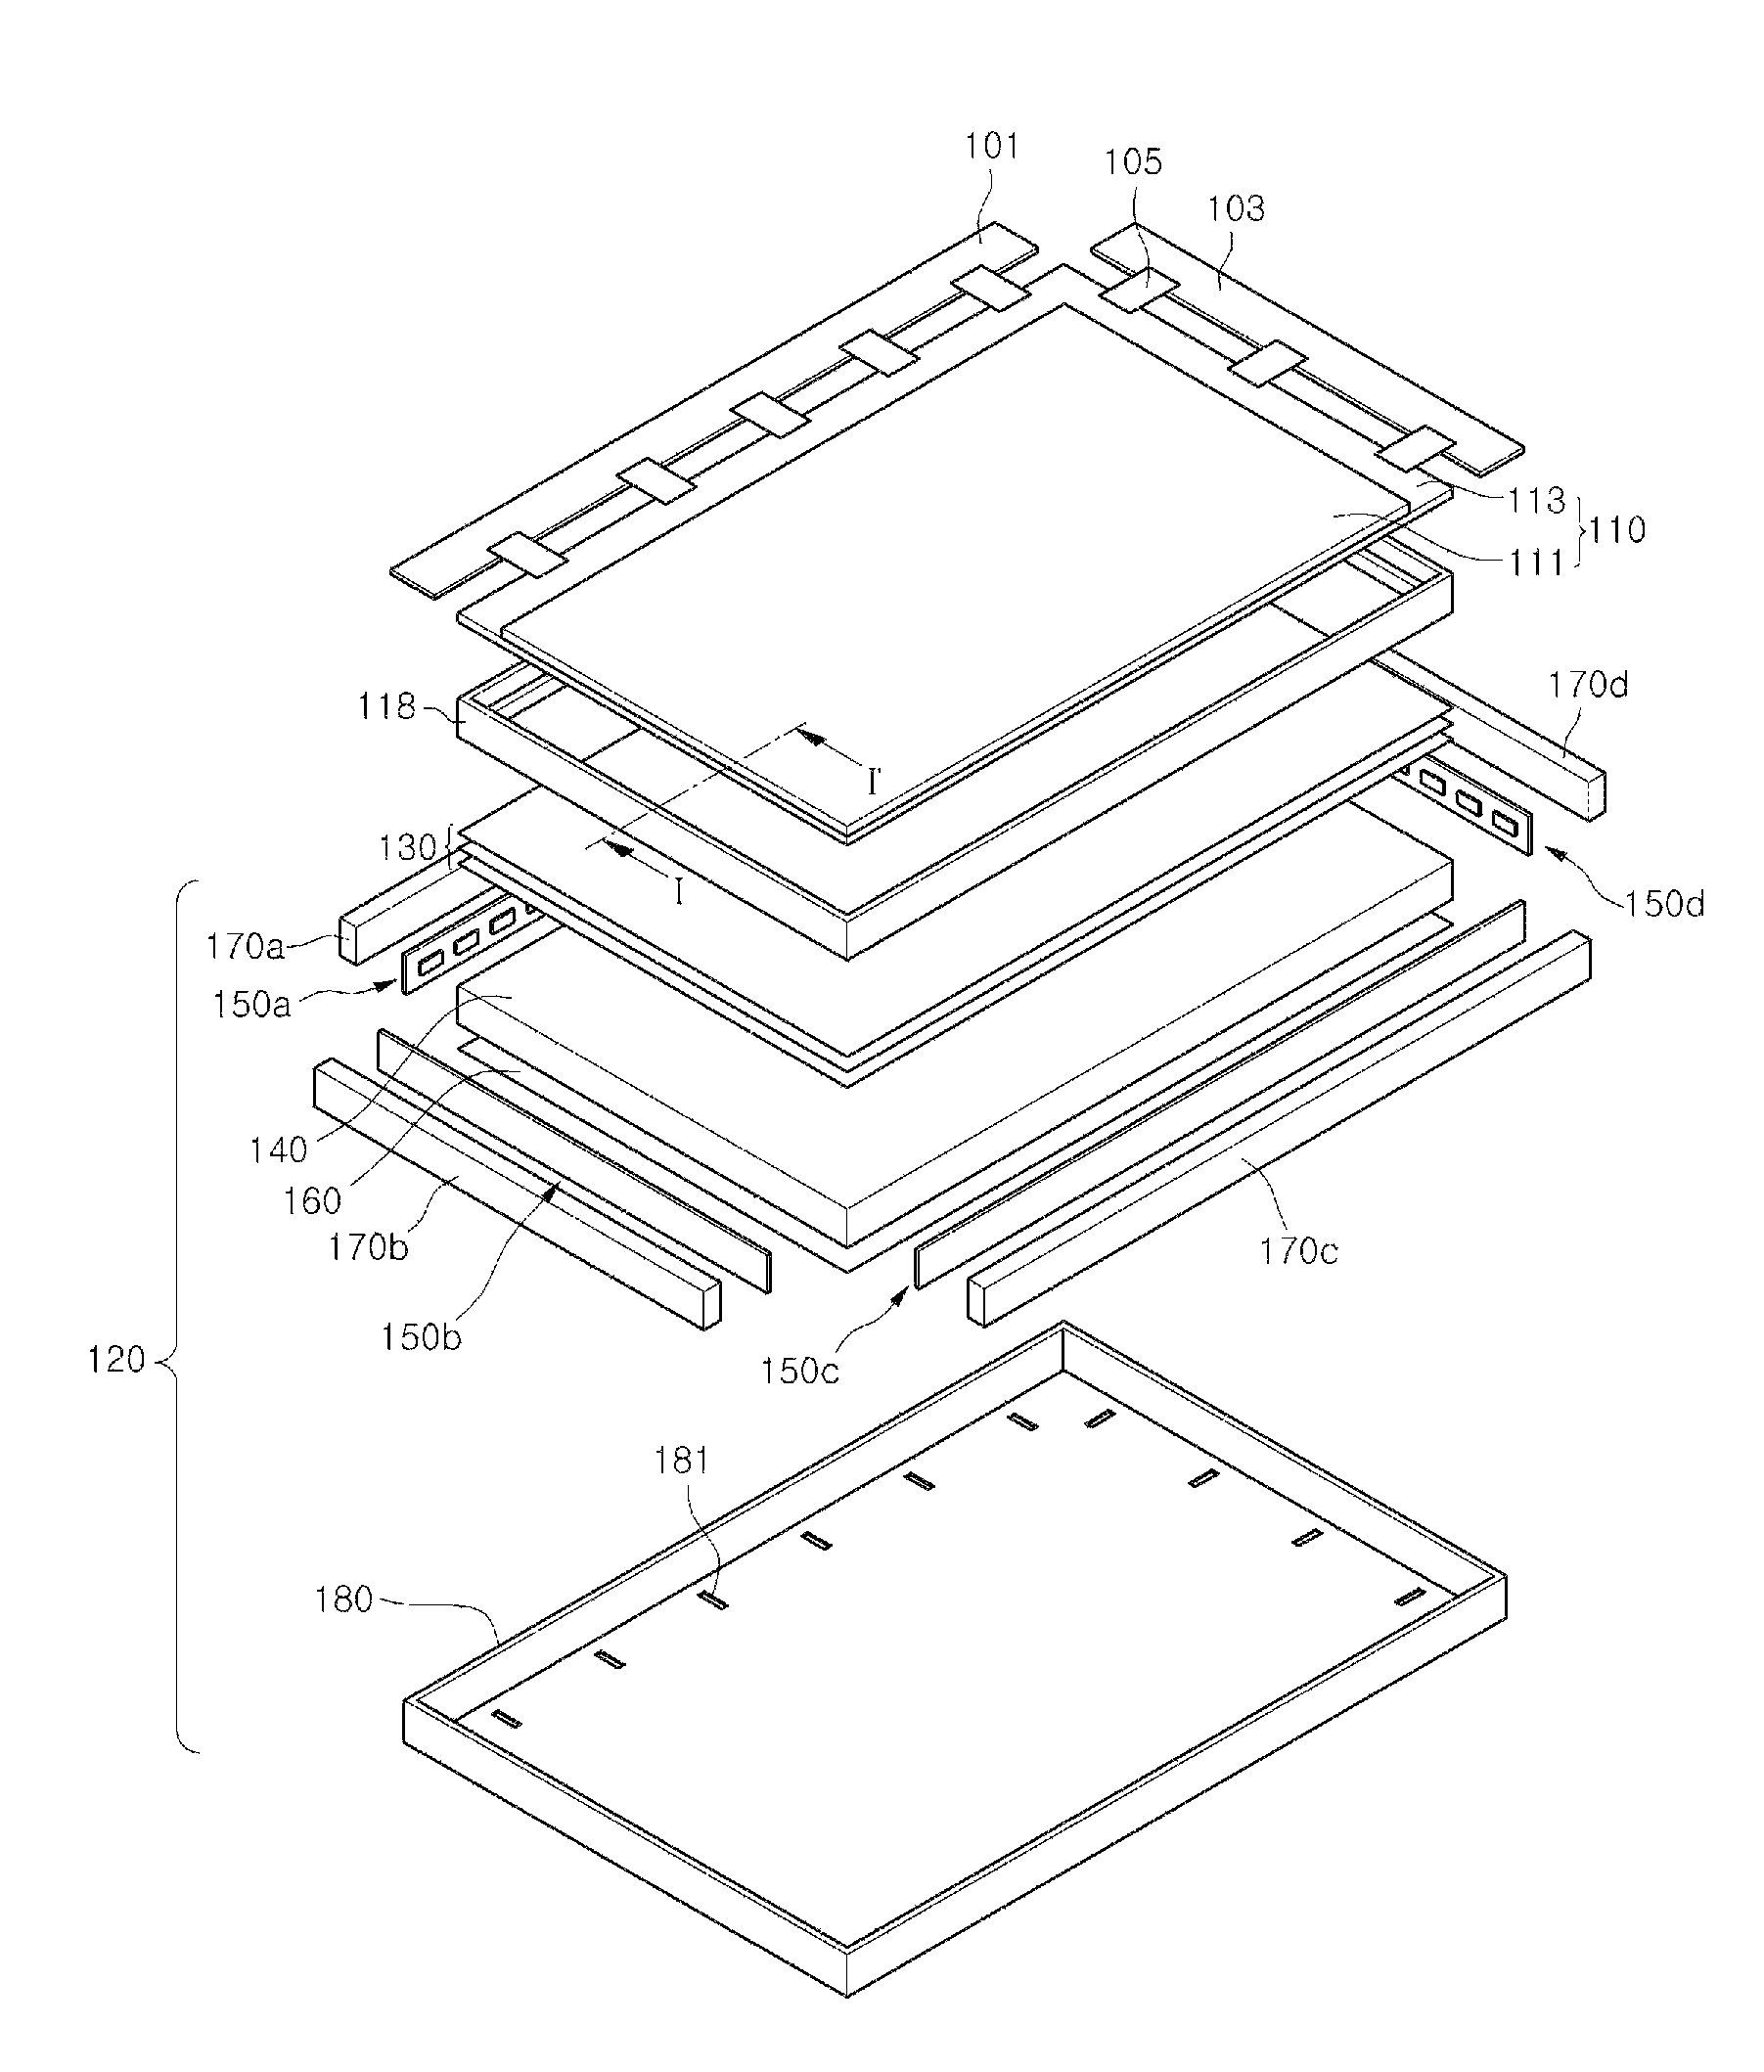 Backlight unit comprising a plurality of slits formed on a bottom surface of at least one edge of a bottom cover and liquid crystal display device having the same